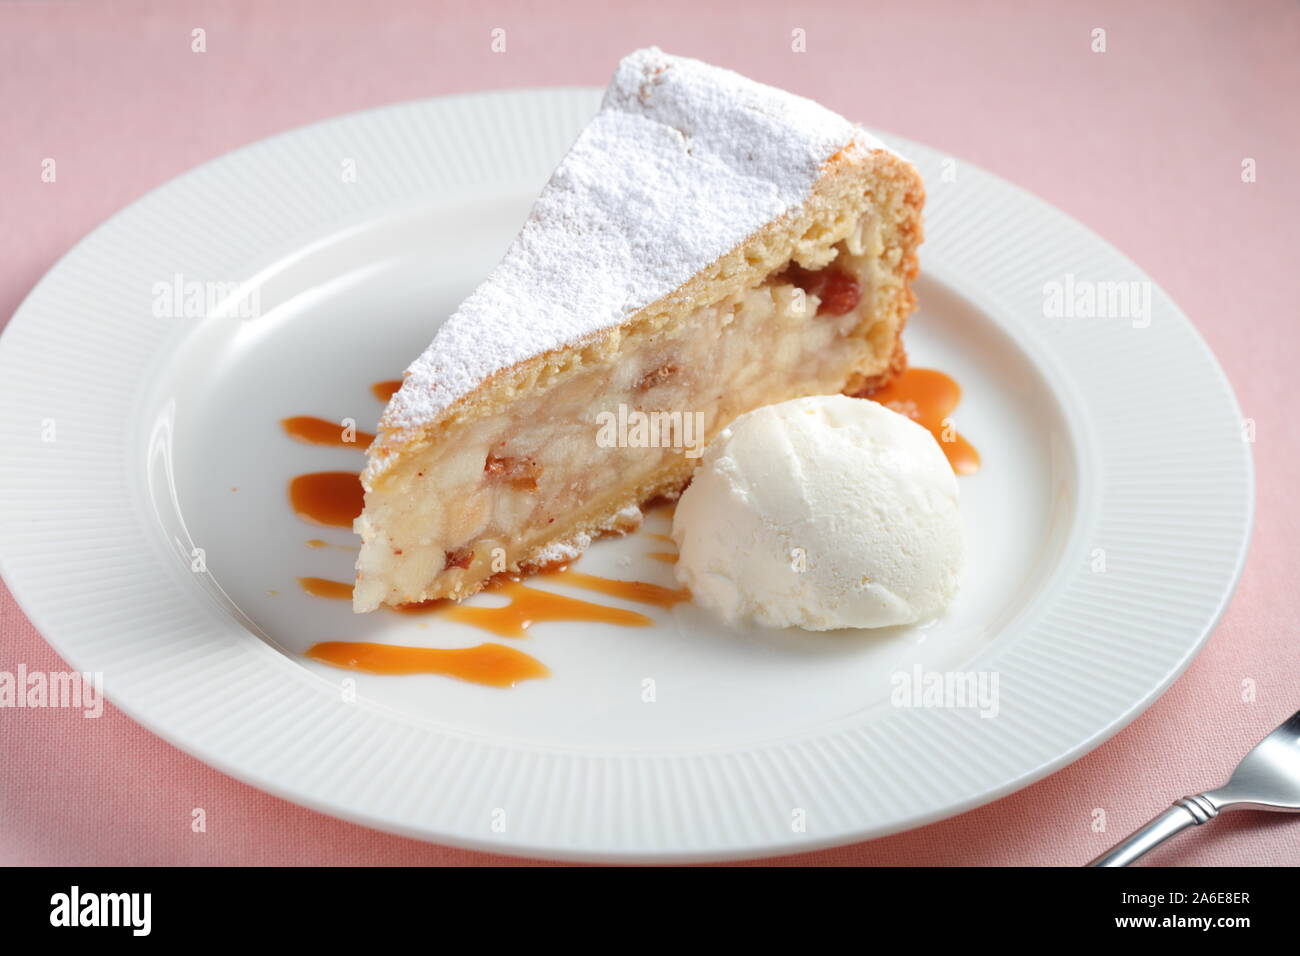 Slice of apple strudel topped with powdered sugar and a ball of vanilla ice cream on a plate decorated with caramel sauce Stock Photo